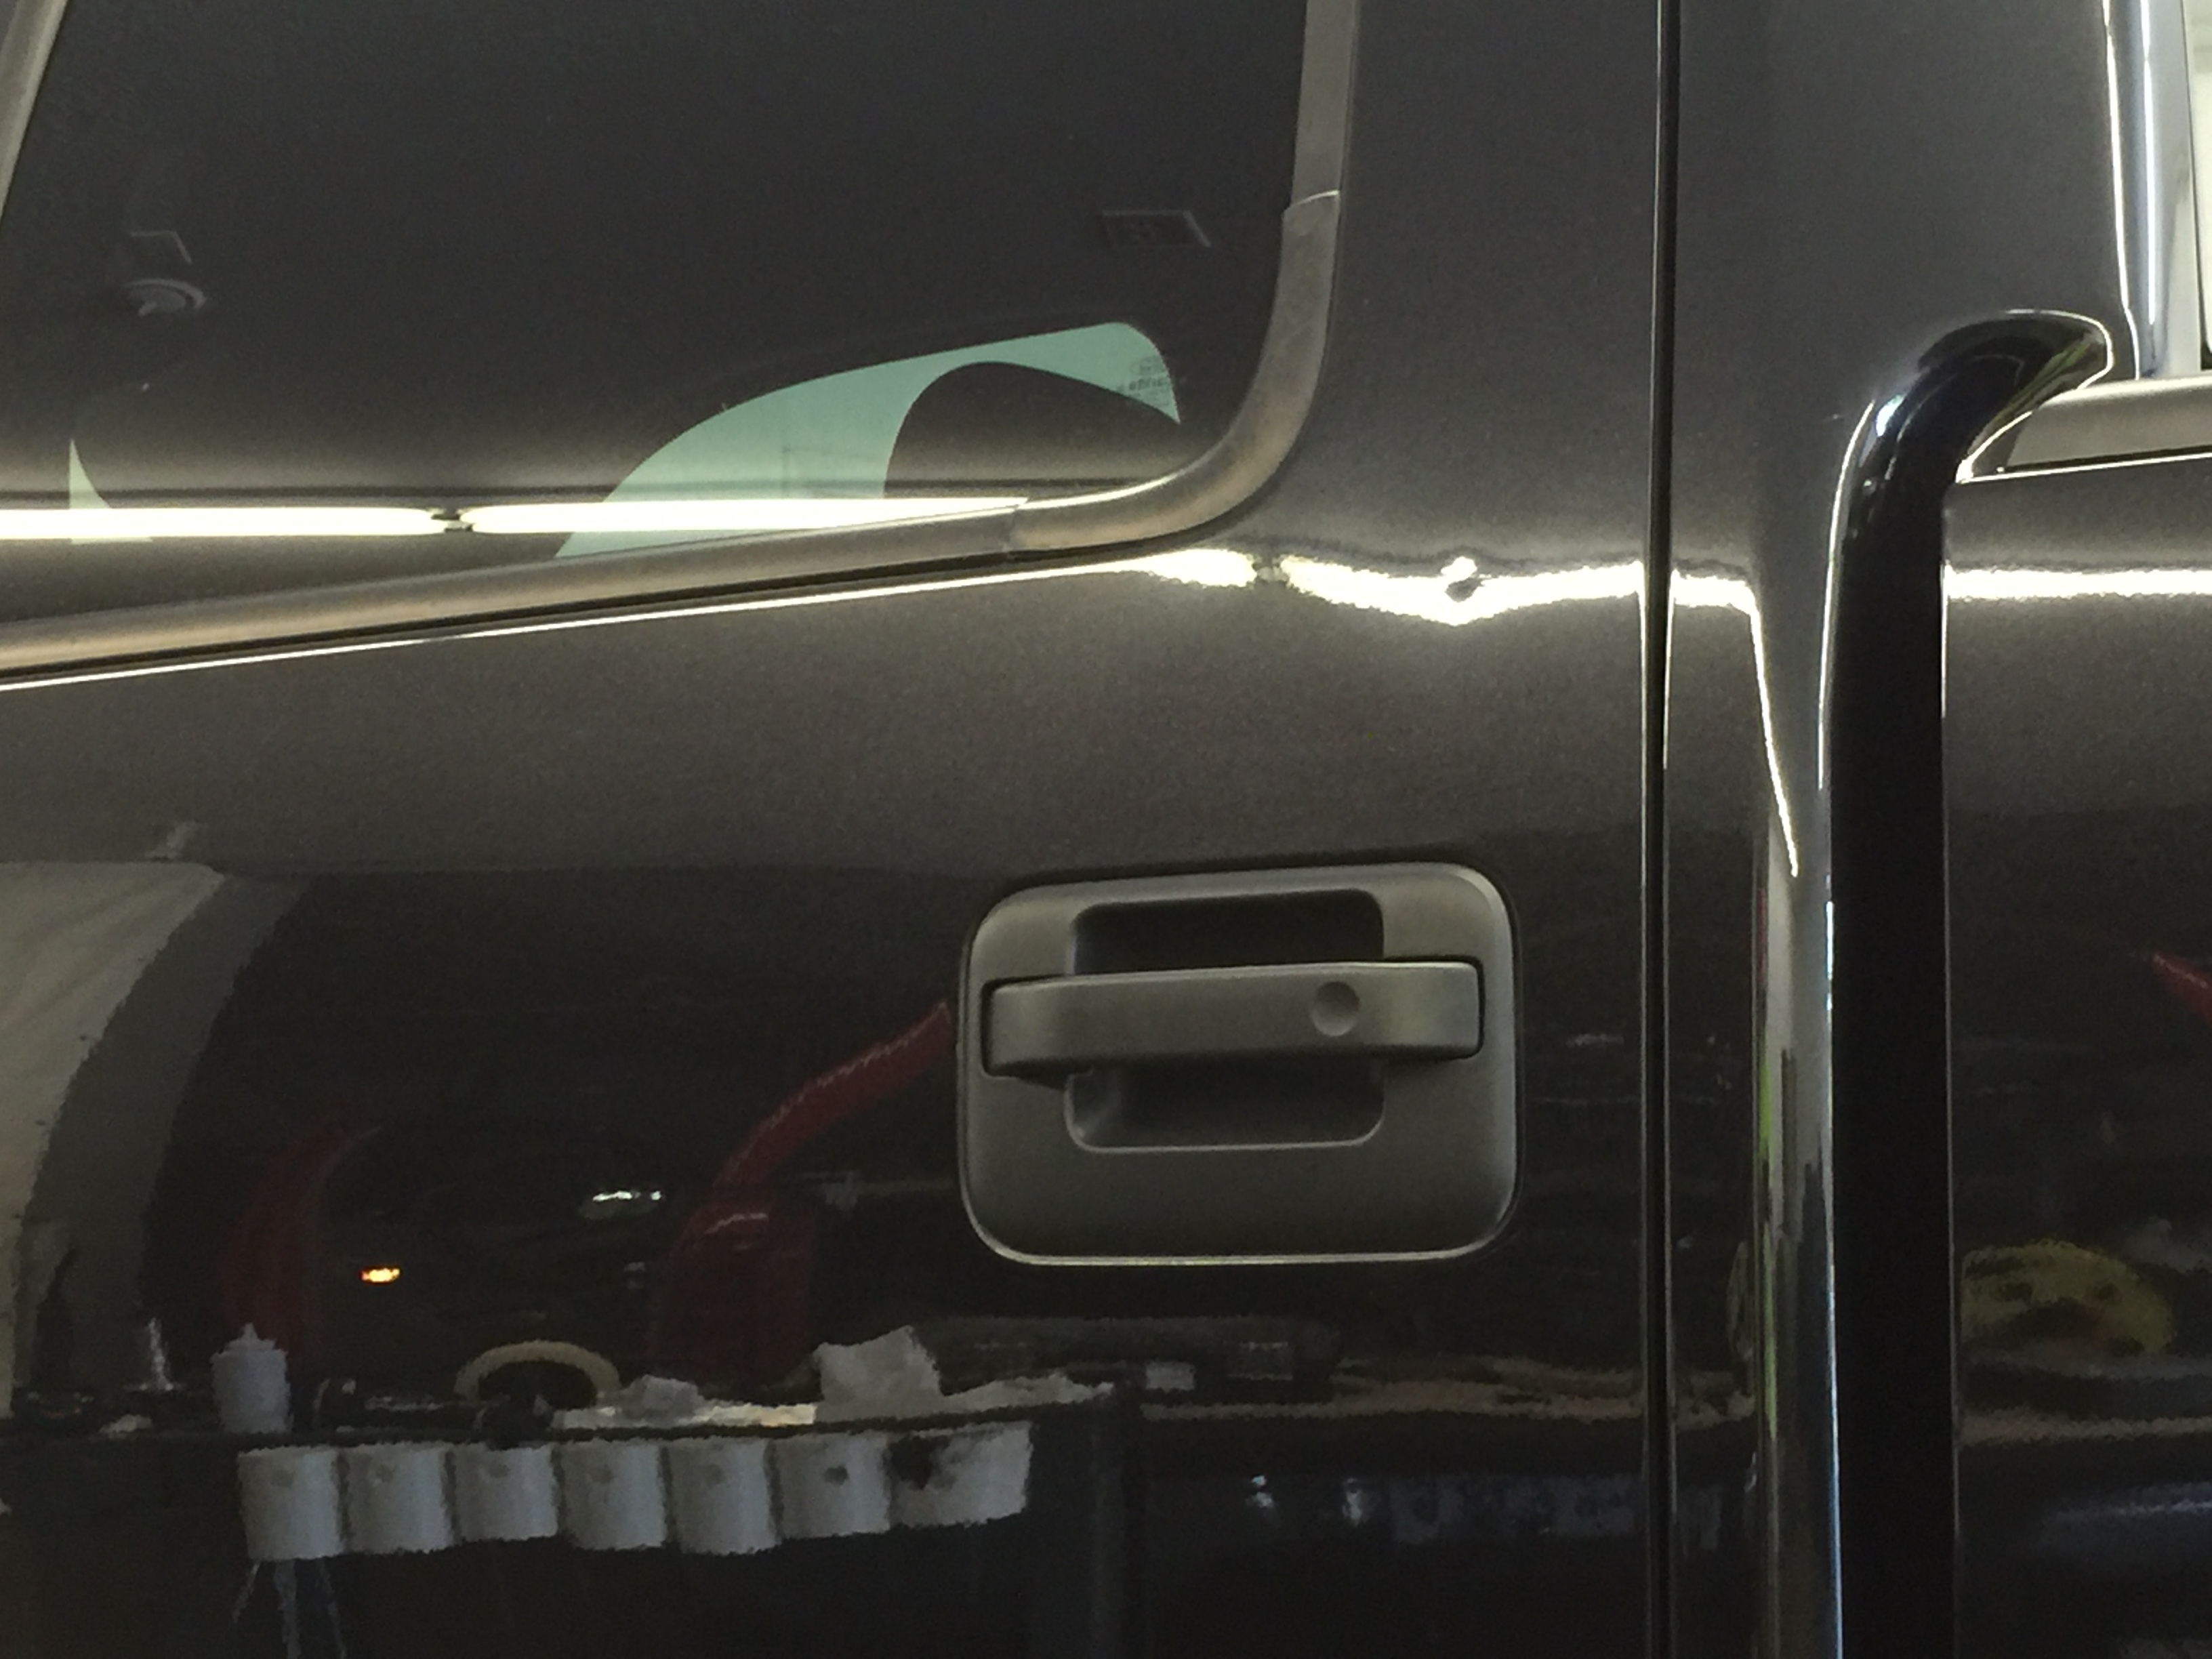 http://217dent.com 2014 Ford F-150 Dent Repair, Michael Bocek out of Springfield, IL. Drivers Side Rear Door, all glue pull dent removal. Paintless Dent Repair, Paintless Dent Removal, Taylorville, Decatur, Pana, IL